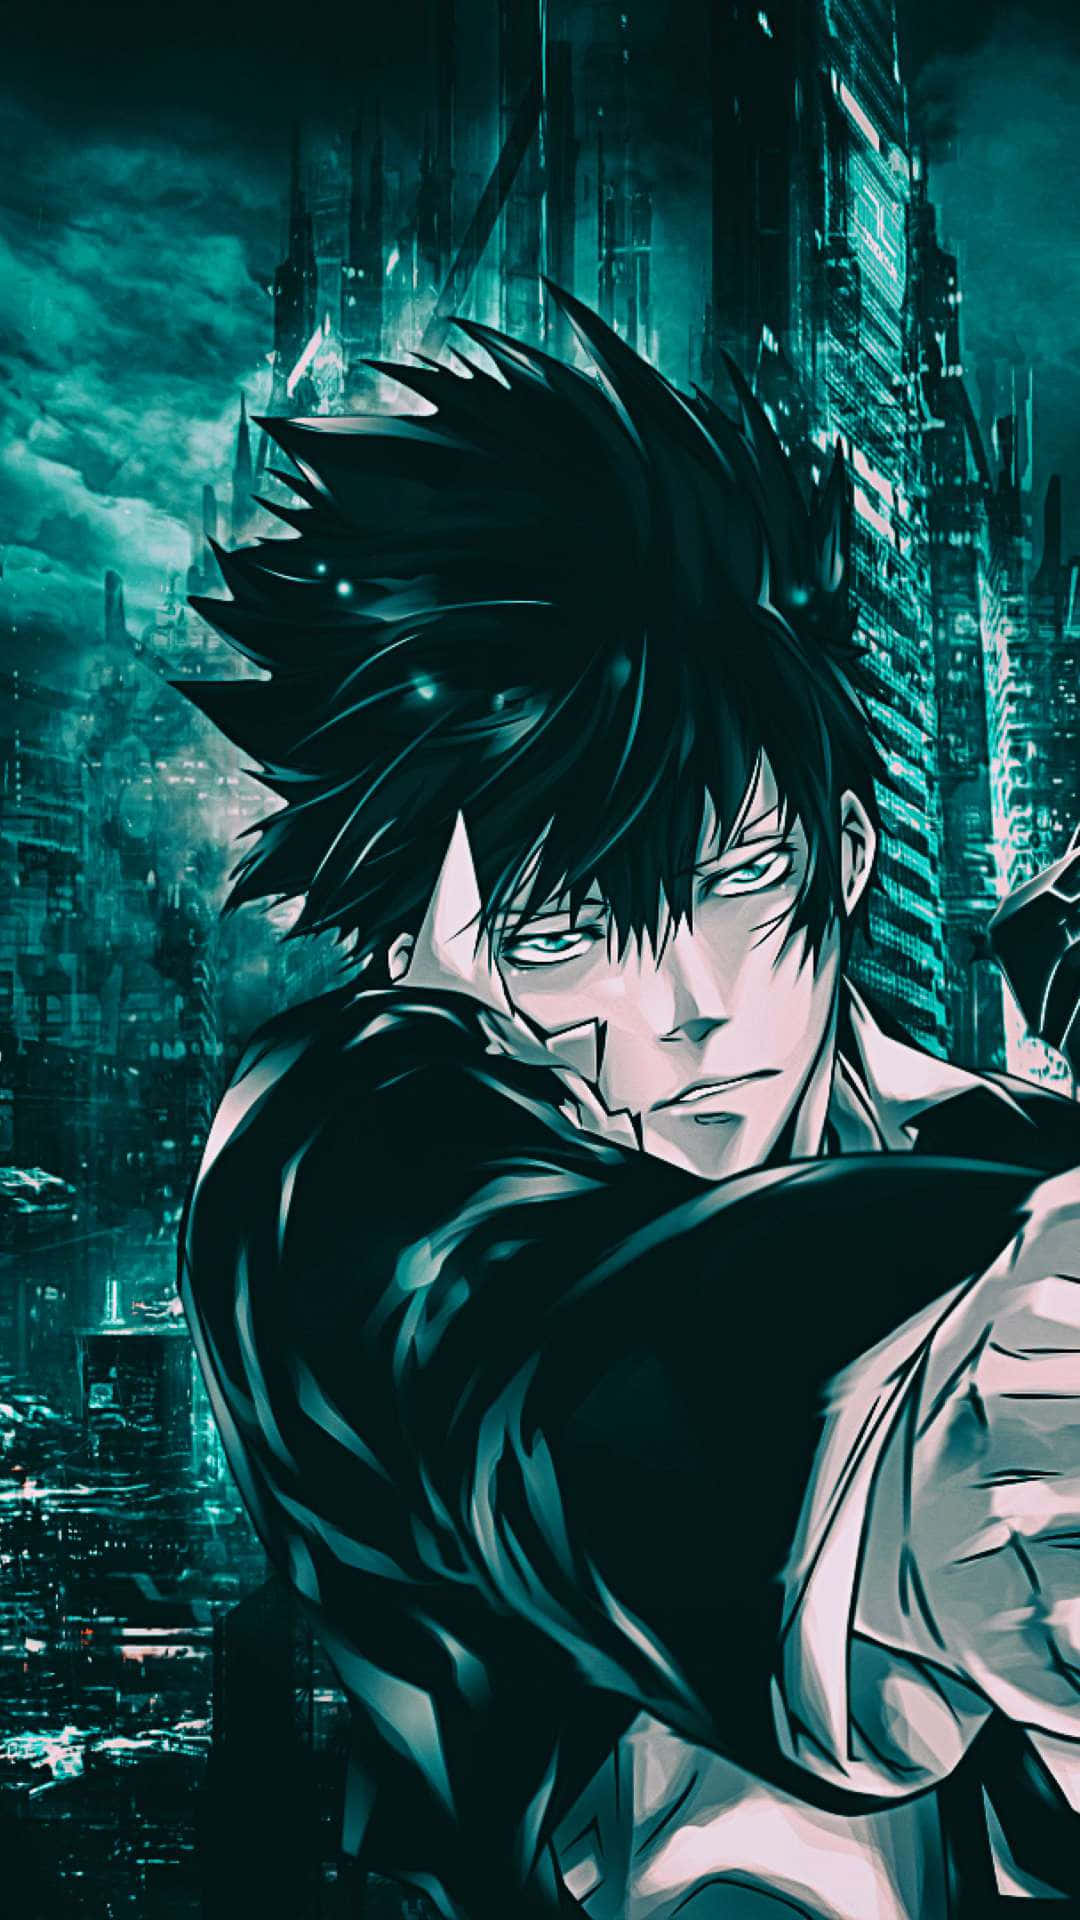 Experience The World Of Psycho Pass And Its Themes Of Justice And Crime